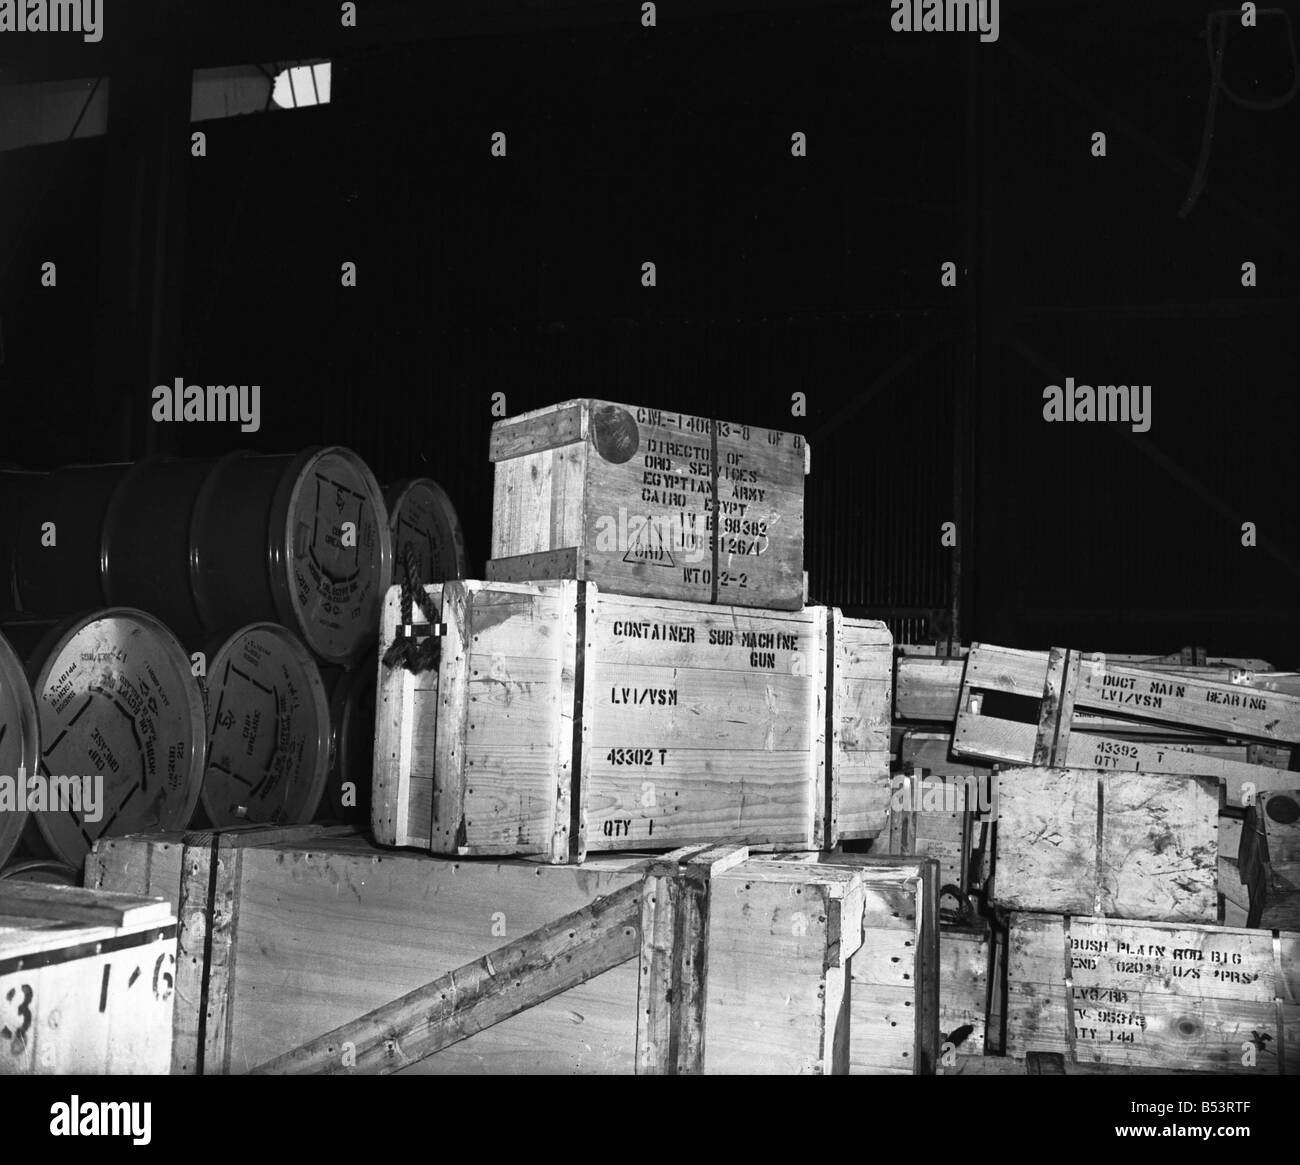 Suez Crisis 1956 British arms waiting to be shipped to Egypt for the Egyptian Army on the ship Star of Suez at Alexander Dock in Liverpool Crates are marked Sub Machine Guns 4 1 56 H86 Stock Photo